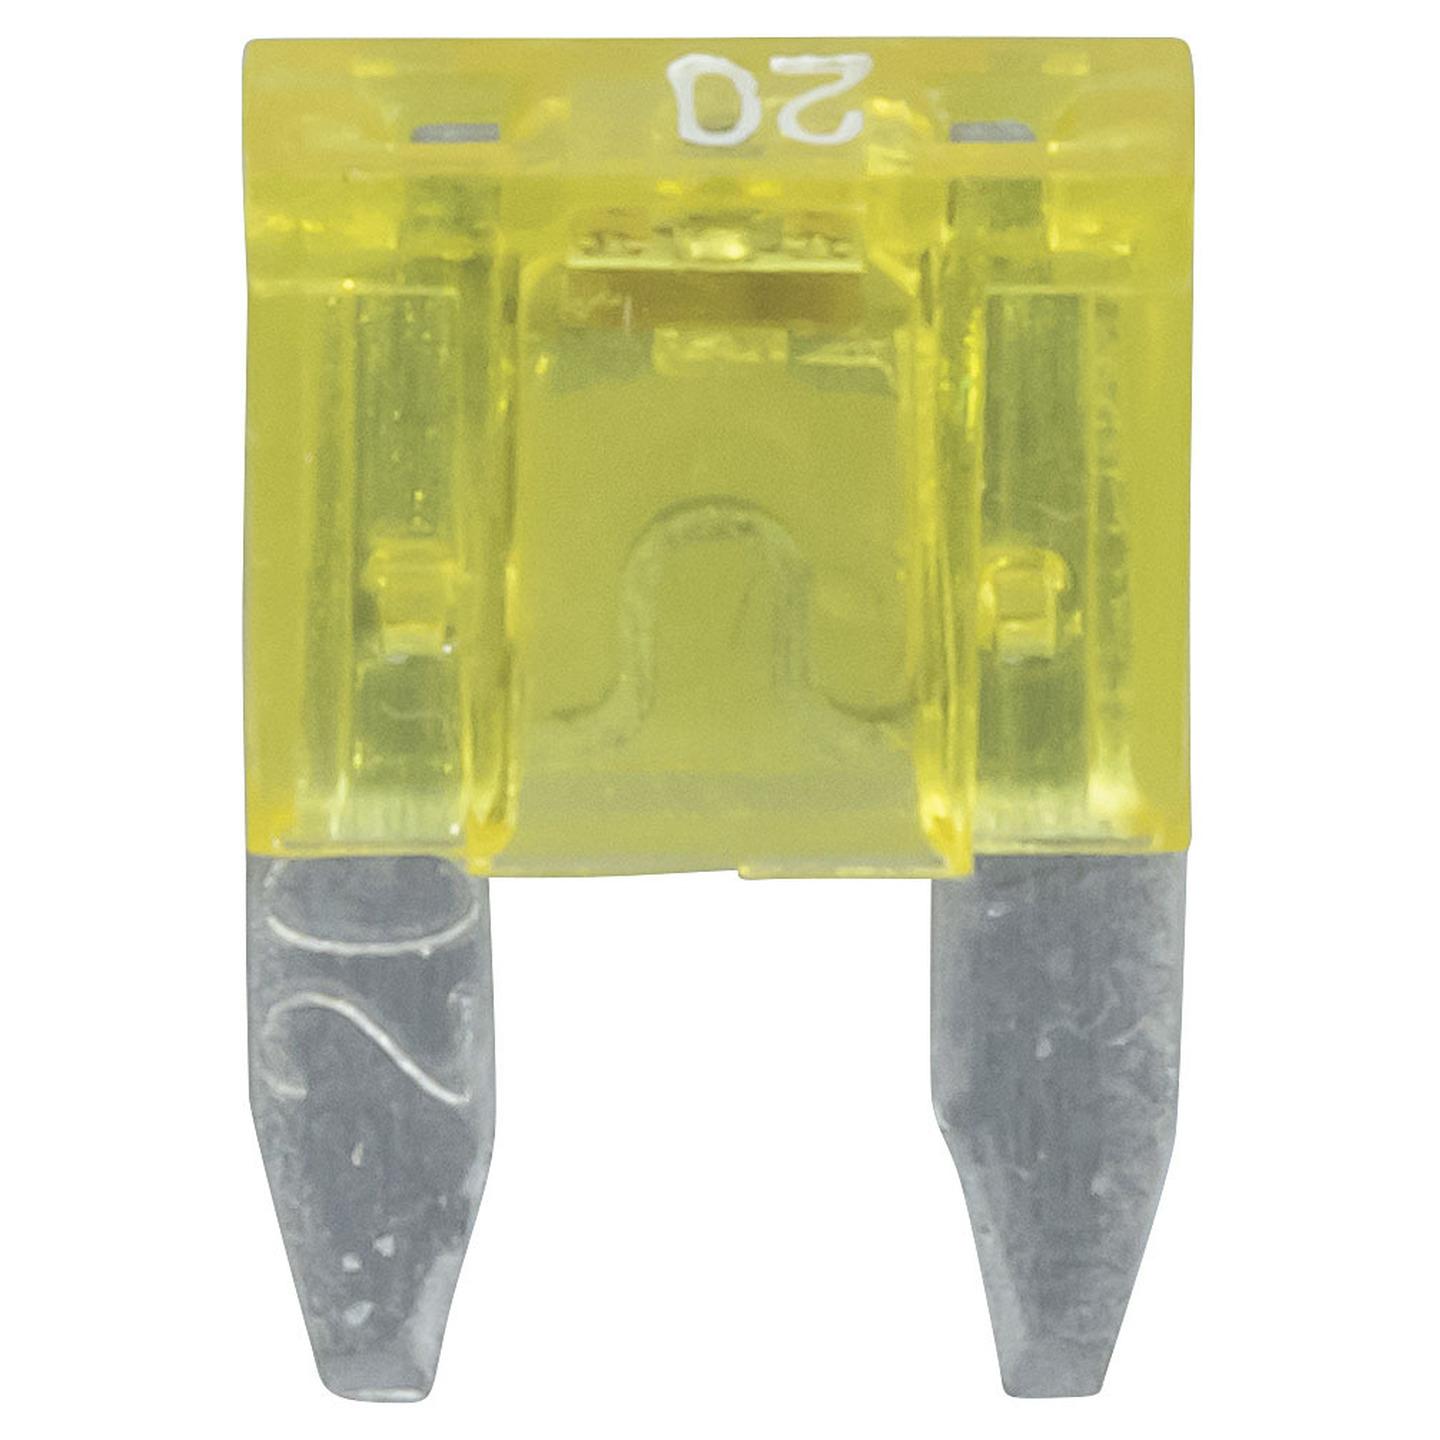 20A Yellow Mini Blade Fuse with LED Indicator